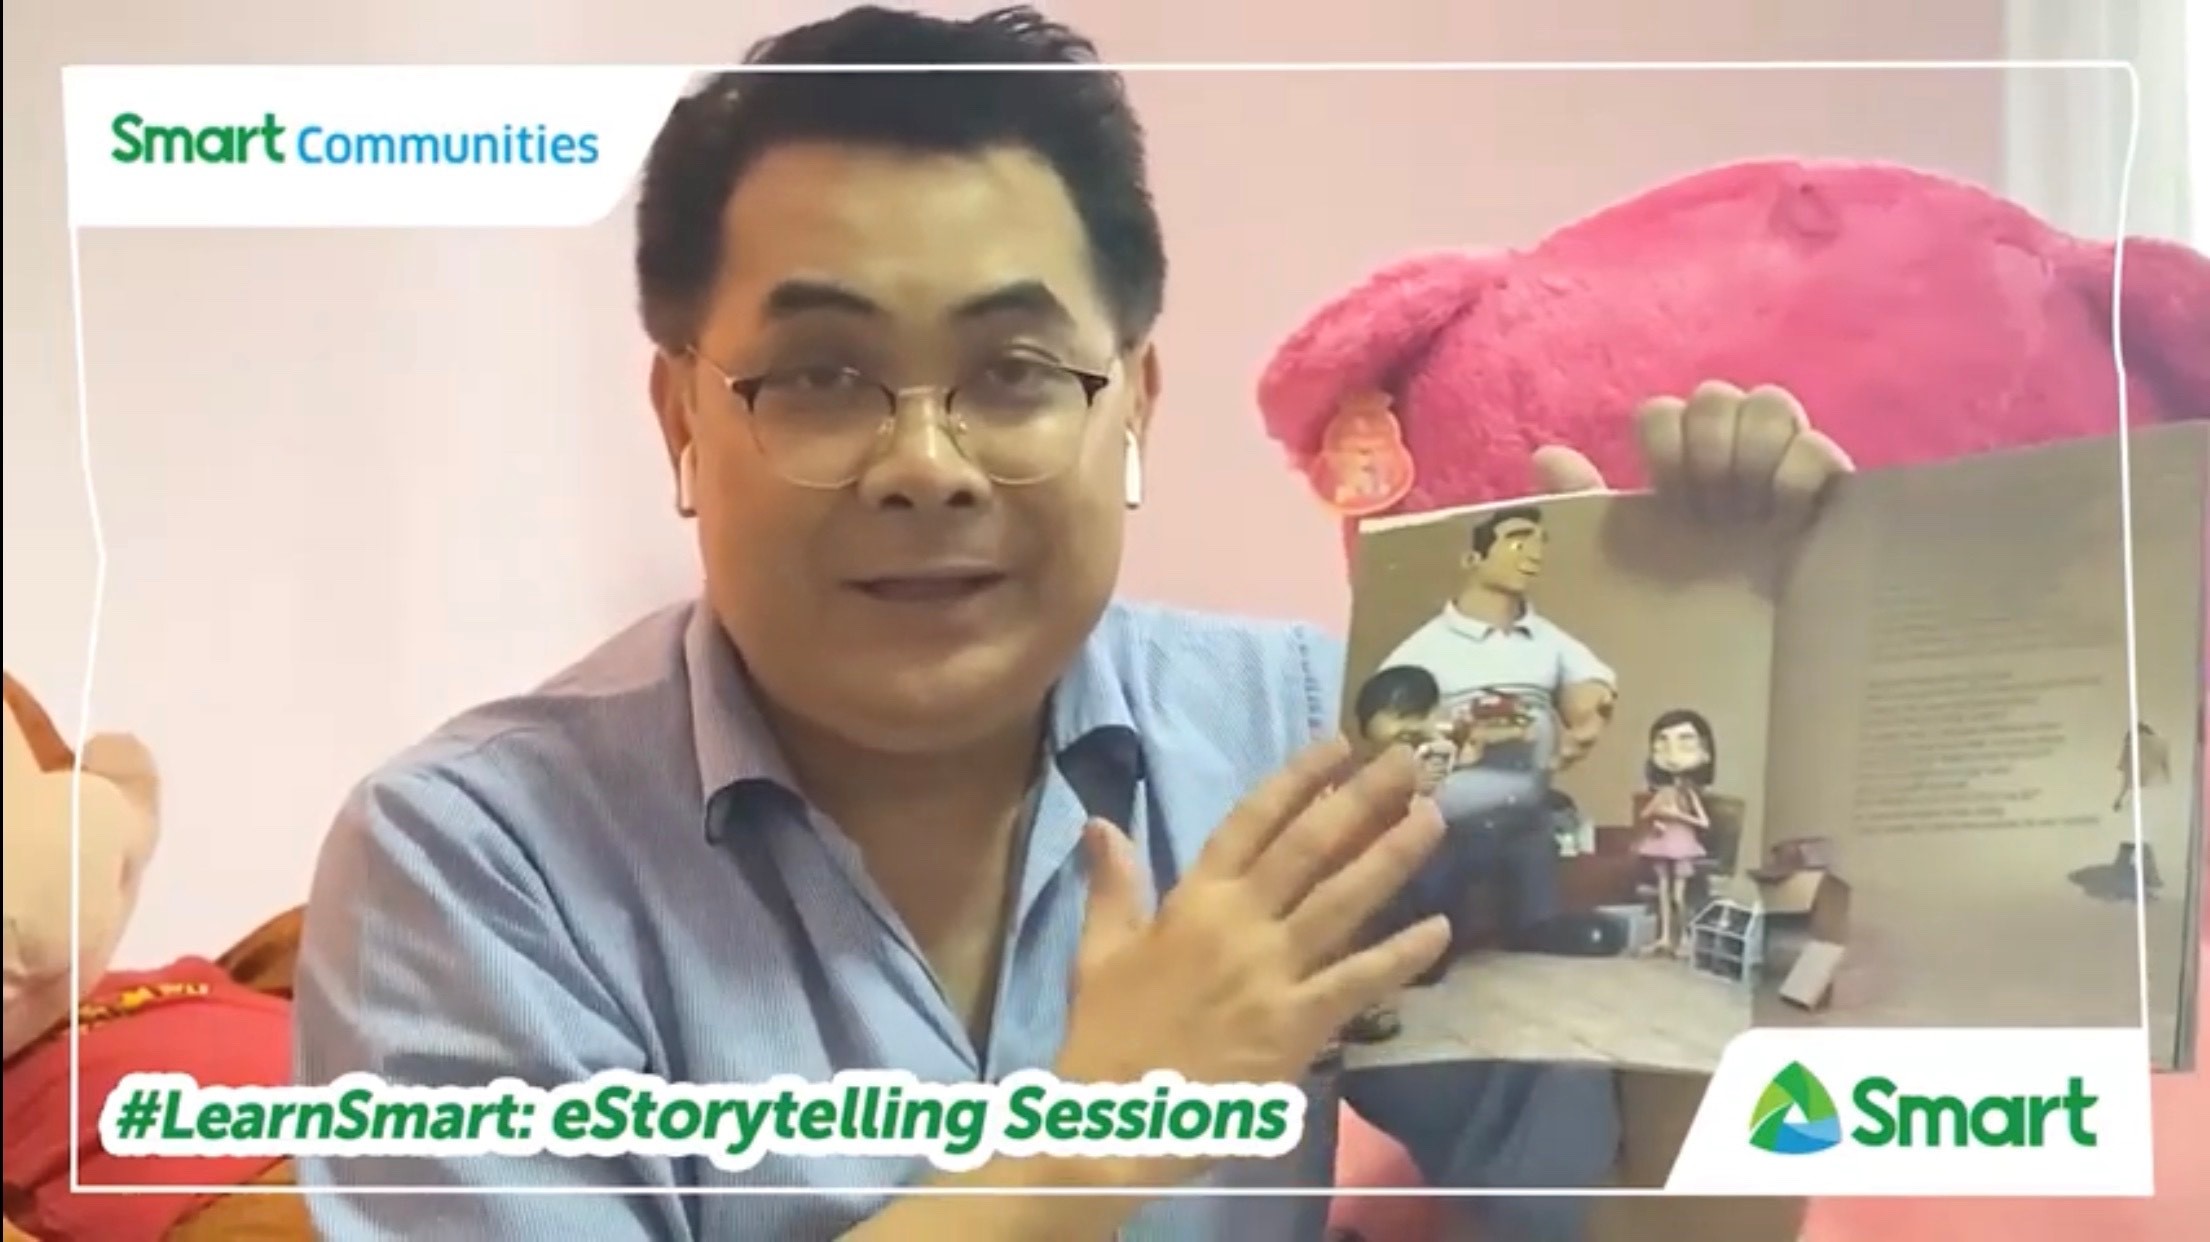 SHARE LOVE OF READING. DepEd Undersecretary Tonisito M.C. Umali says, “as a parent, I acknowledge the importance of storytelling to our children. Storytelling was one of my ways to share the love for reading. It became a bonding moment for me and my kids when they were younger.”